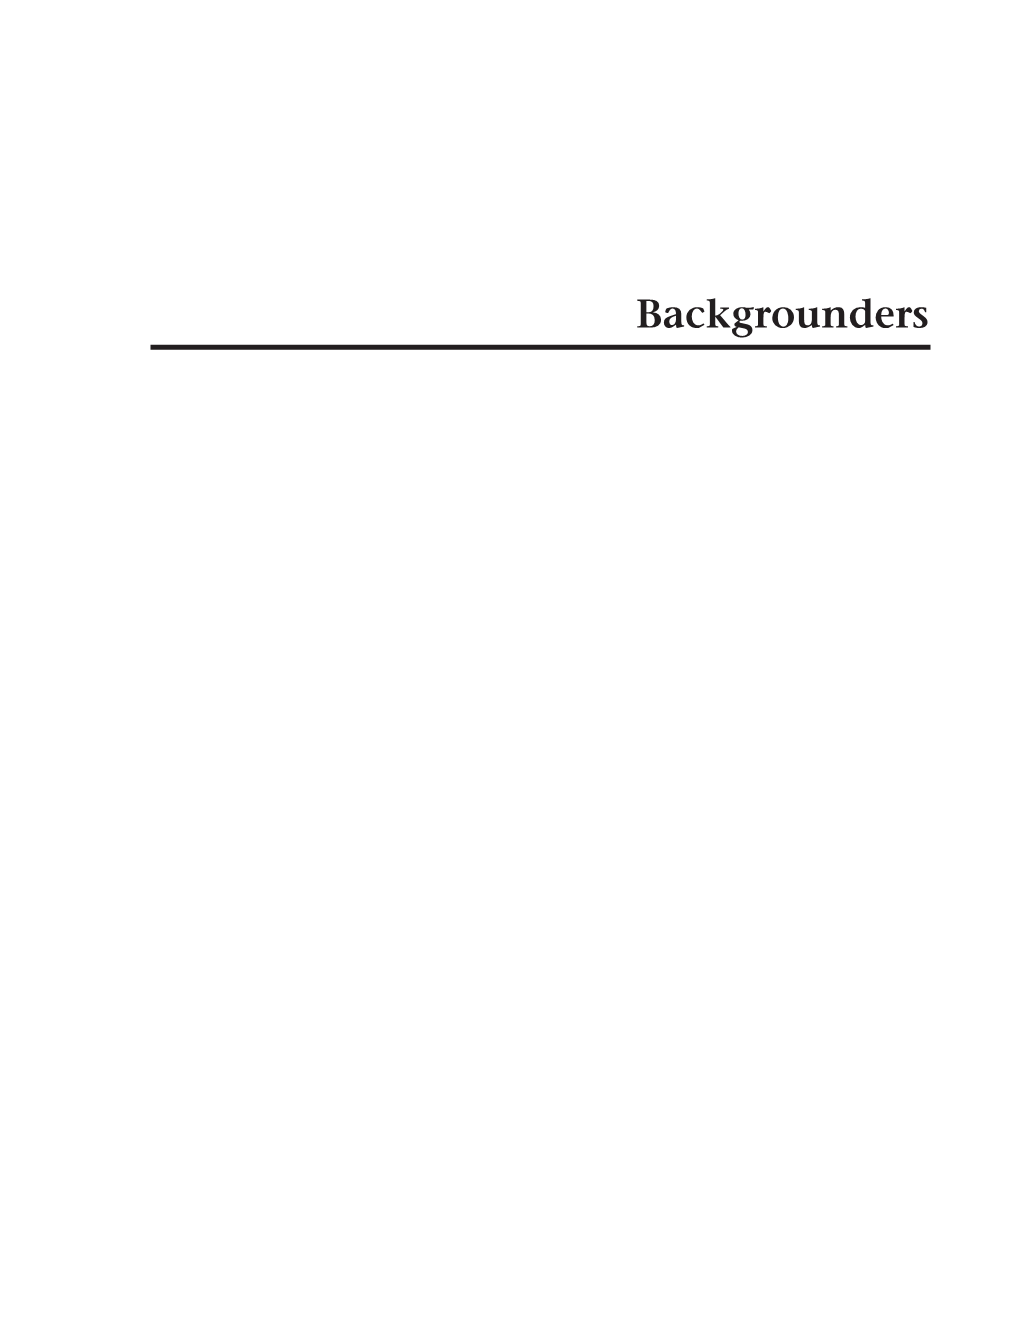 Backgrounders 08 Gr9ss TR Bckgrnd-FINAL2 9/12/08 3:46 PM Page 282 08 Gr9ss TR Bckgrnd-FINAL2 9/12/08 3:46 PM Page 283